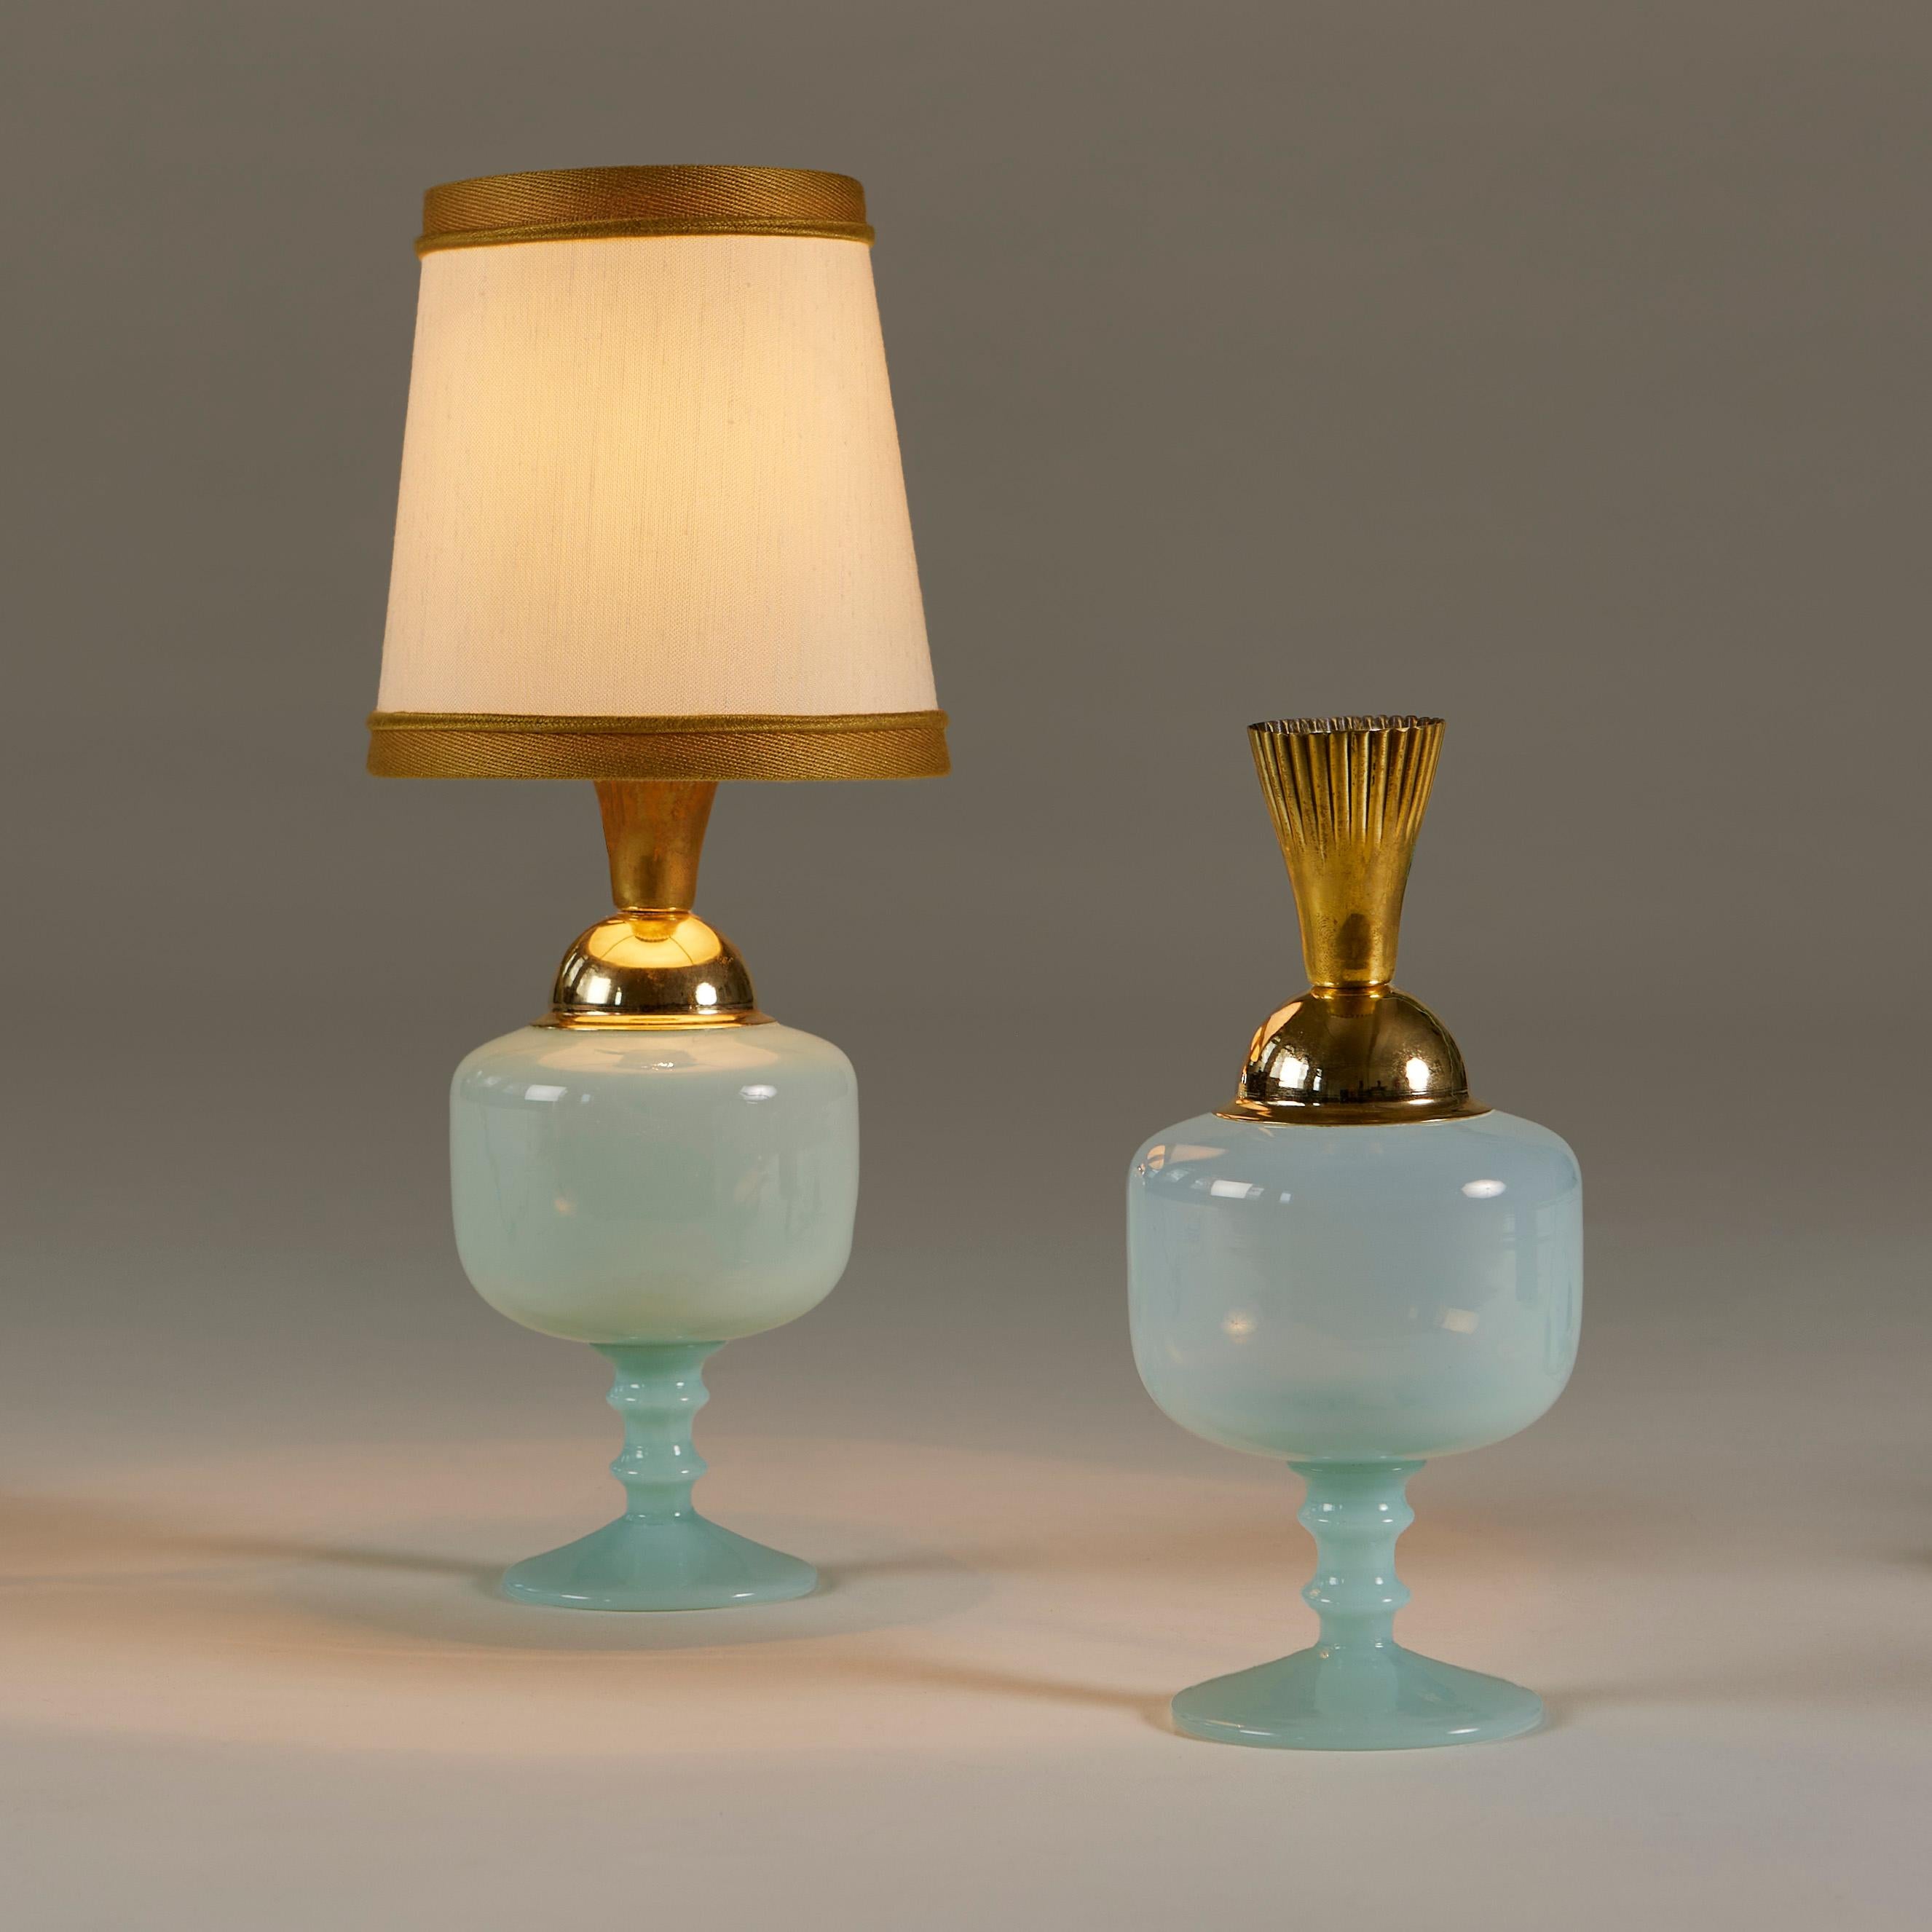 Pale turquoise glass table urn shaped lamps with decorative brass fittings. Perfect for a dressing-table or desk or anywhere in need of a mood enhancing touch.
